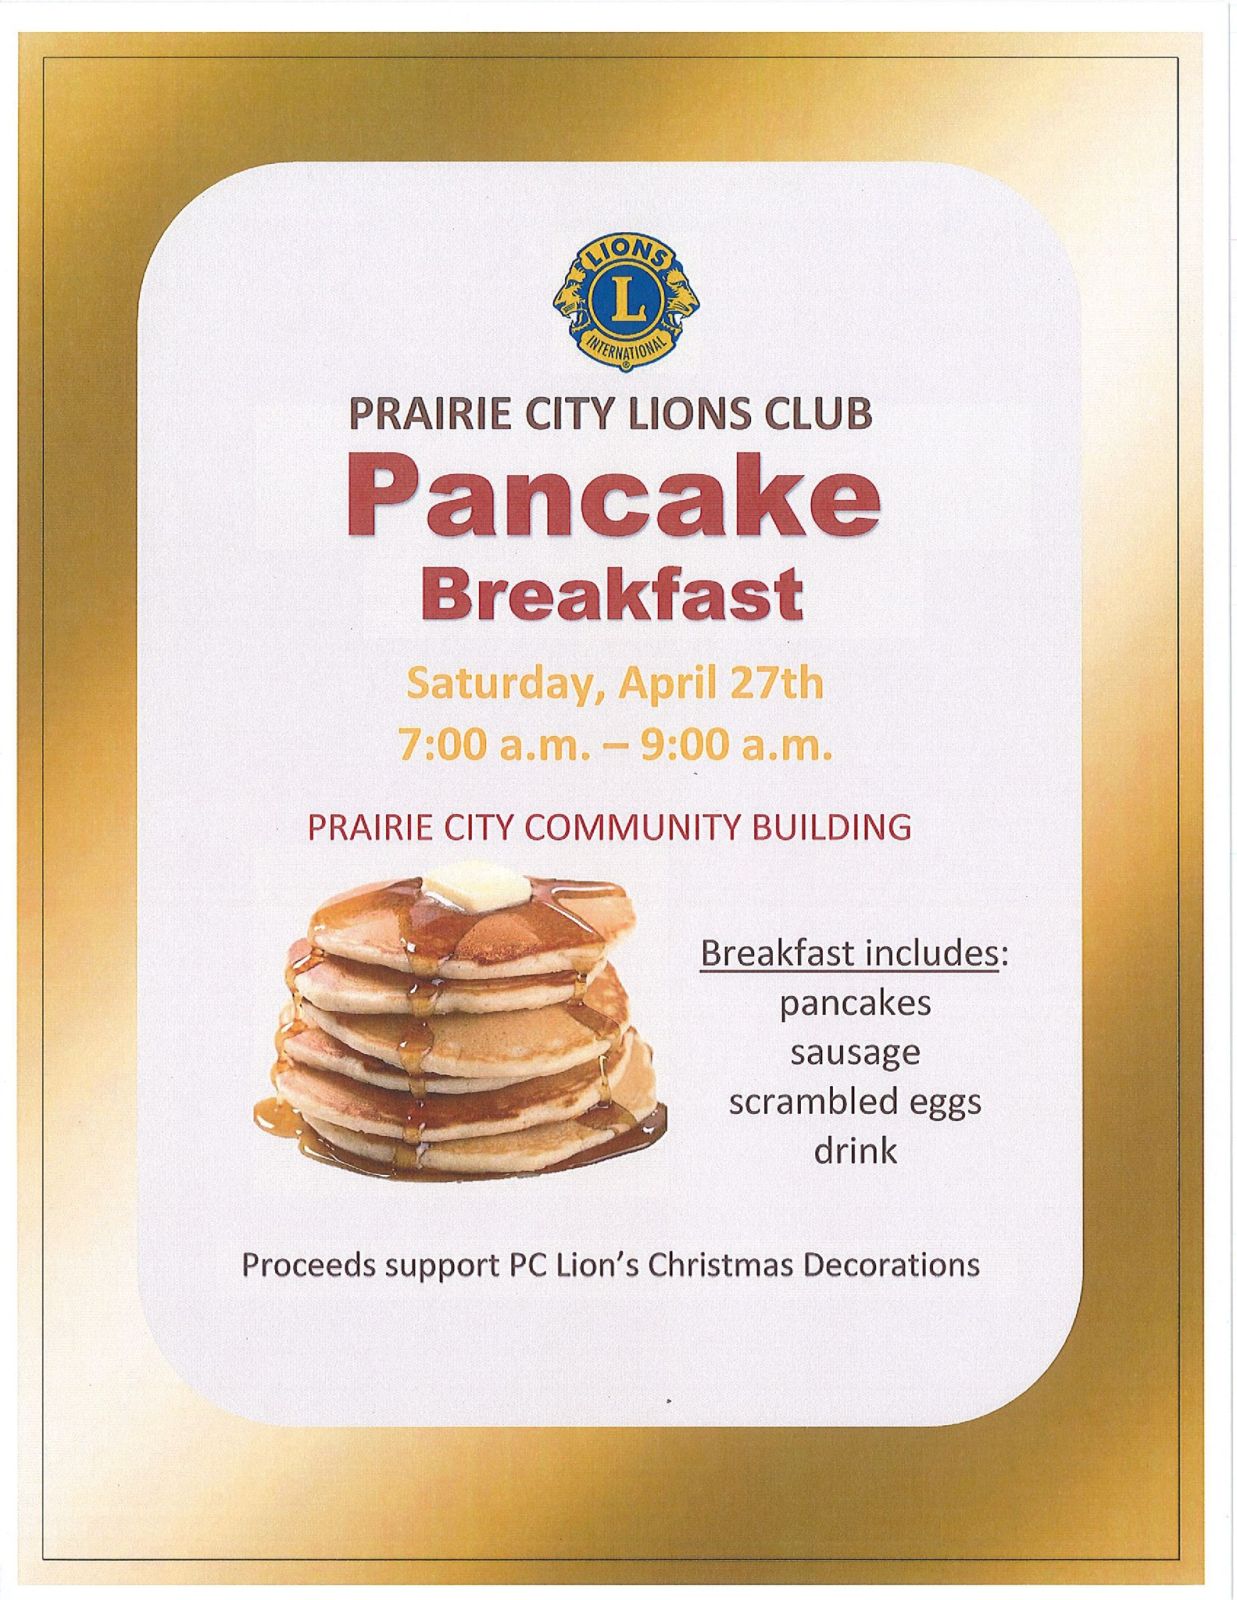 Event Promo Photo For Lions Club Pancake Breakfast benefitting the Lion's Club Christmas decorations